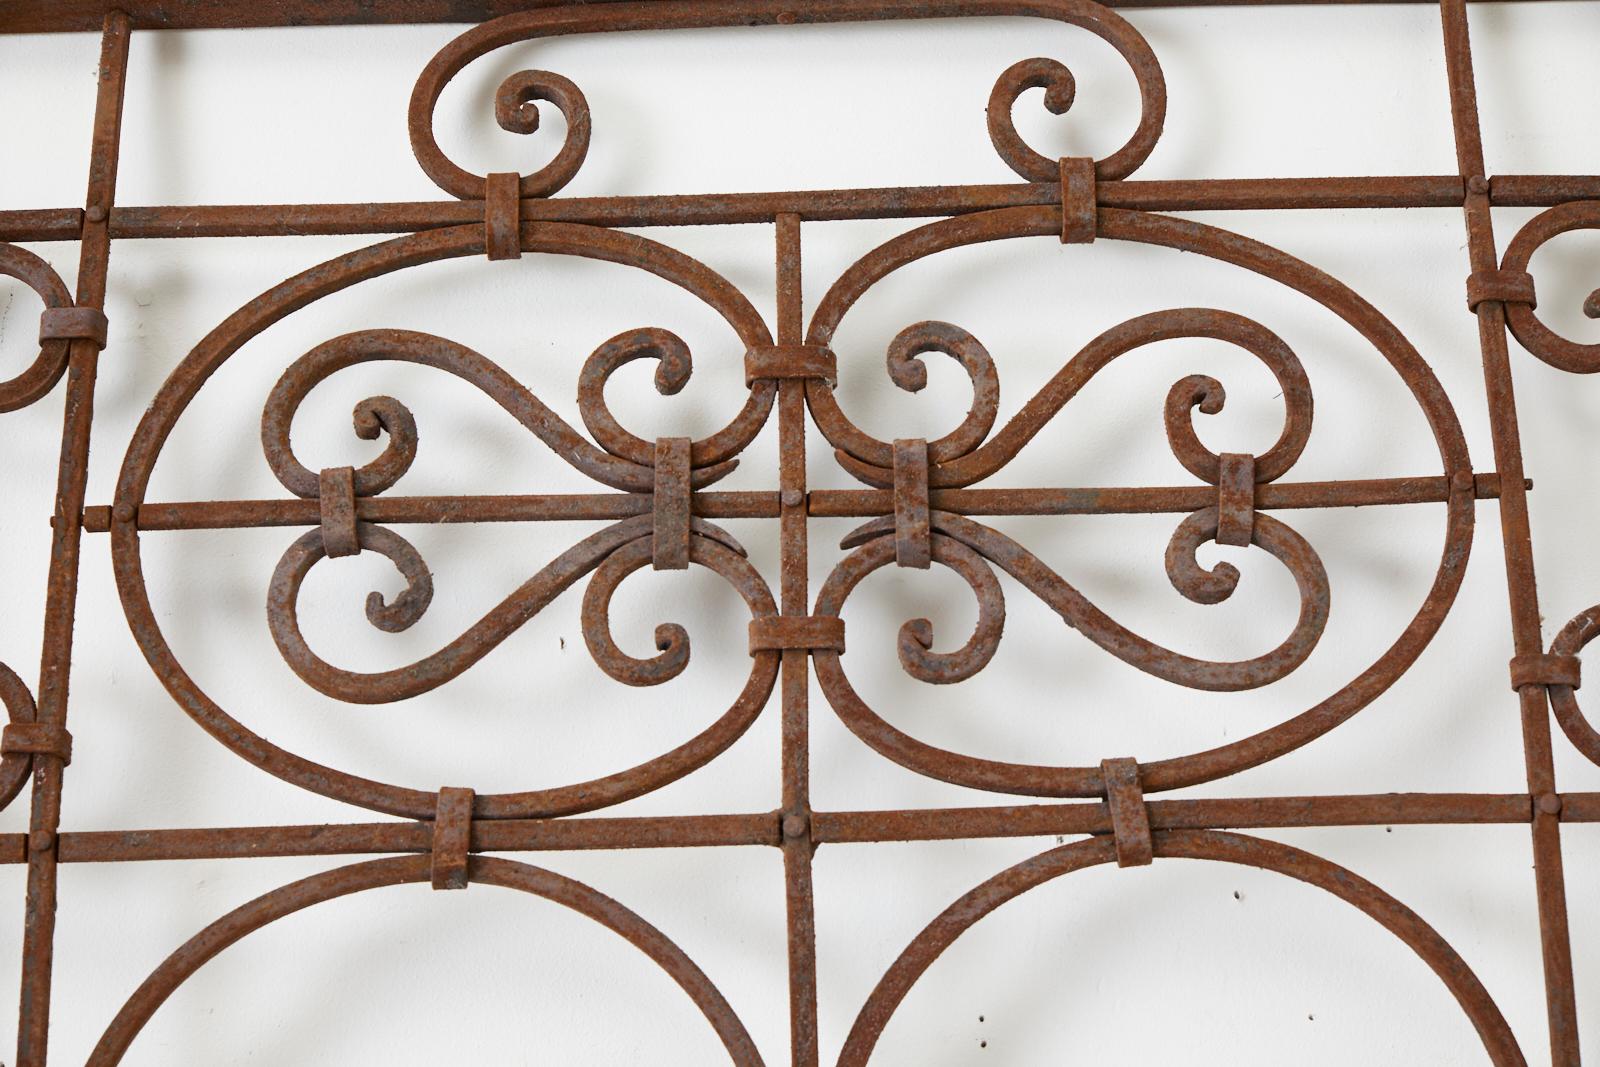 Spanish Colonial Set of Eight Spanish Wrought Iron Doors or Gates